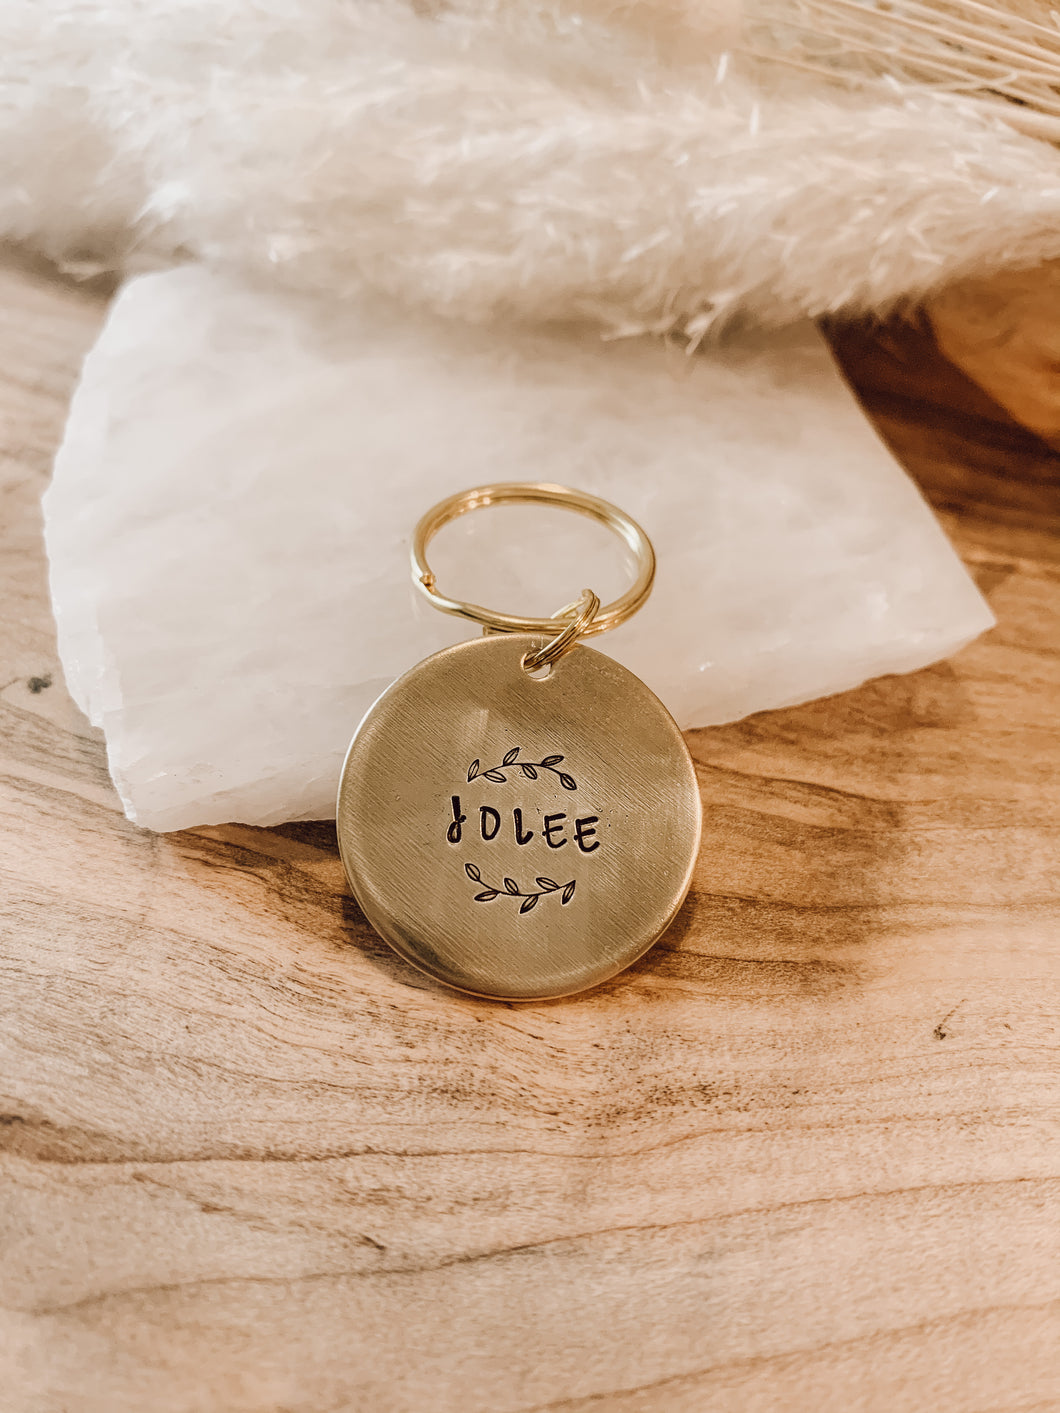 Wild Olive Branches | Hand Stamped Metal Pet ID Tag